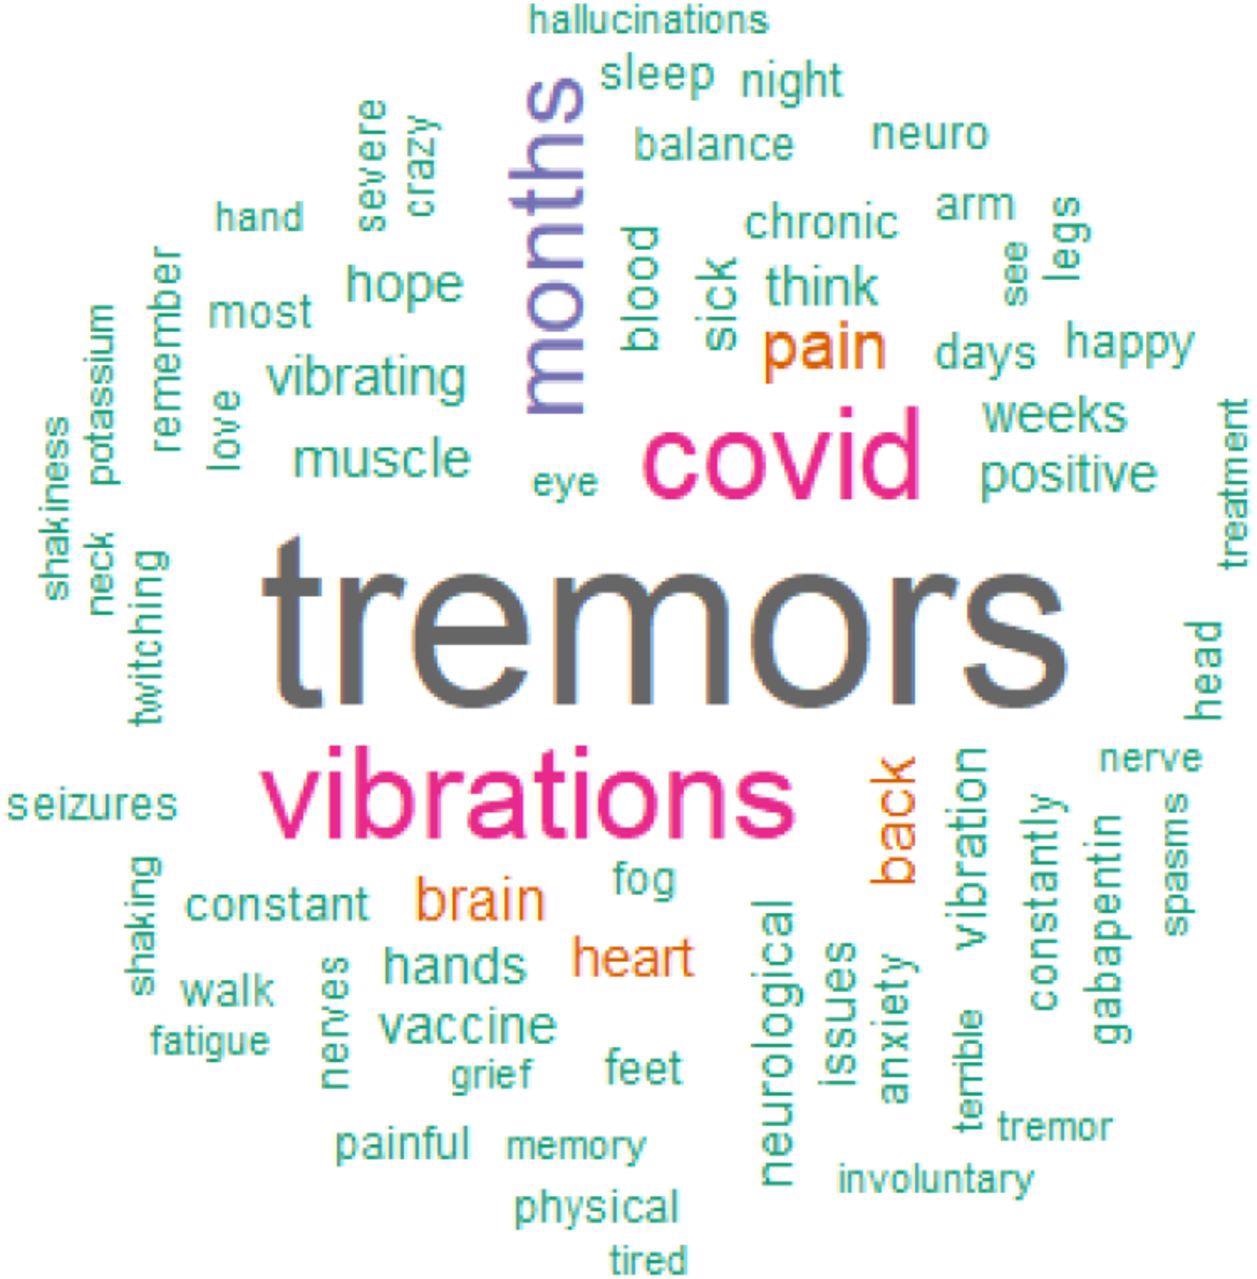 crab inland steamer Internal tremors and vibrations symptoms among people with long-COVID